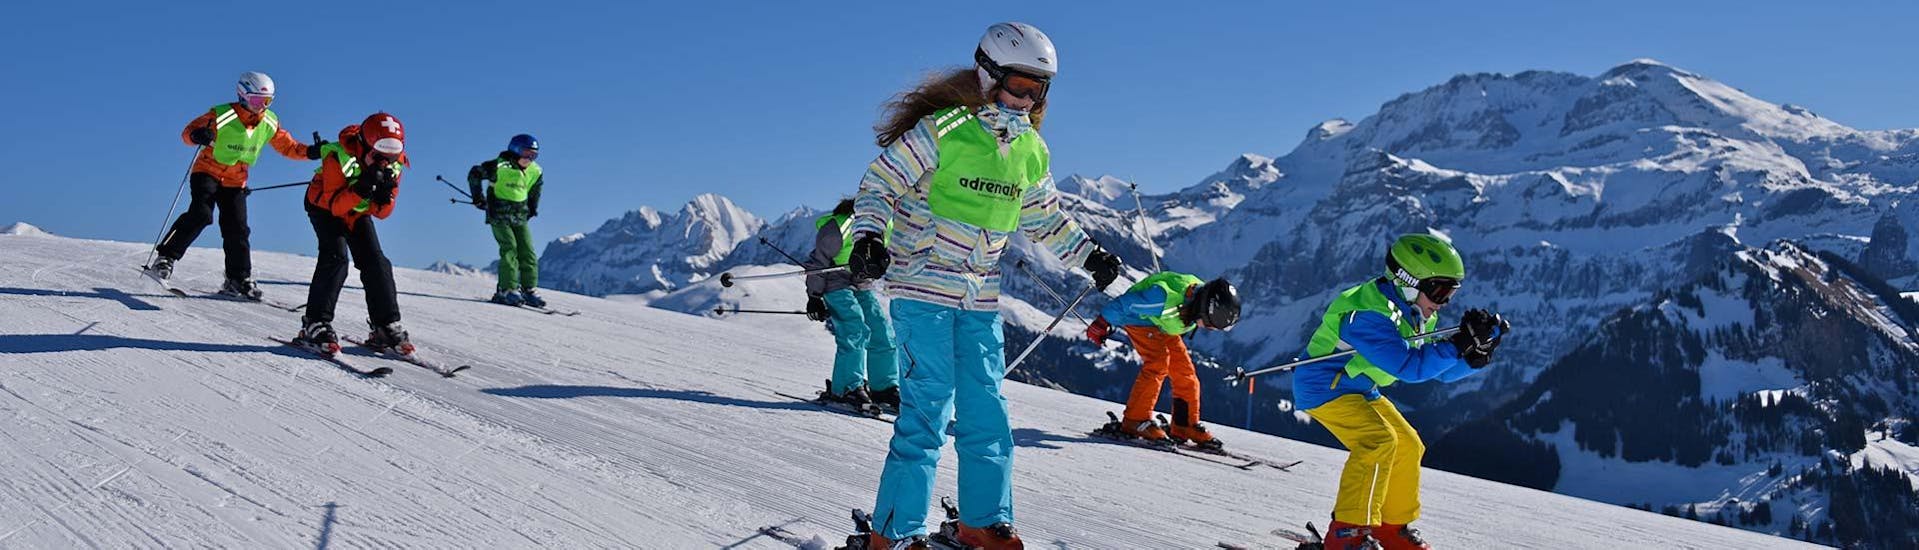 Ski Lessons for Kids (3,5-15 years) - 5 Days - All Levels.